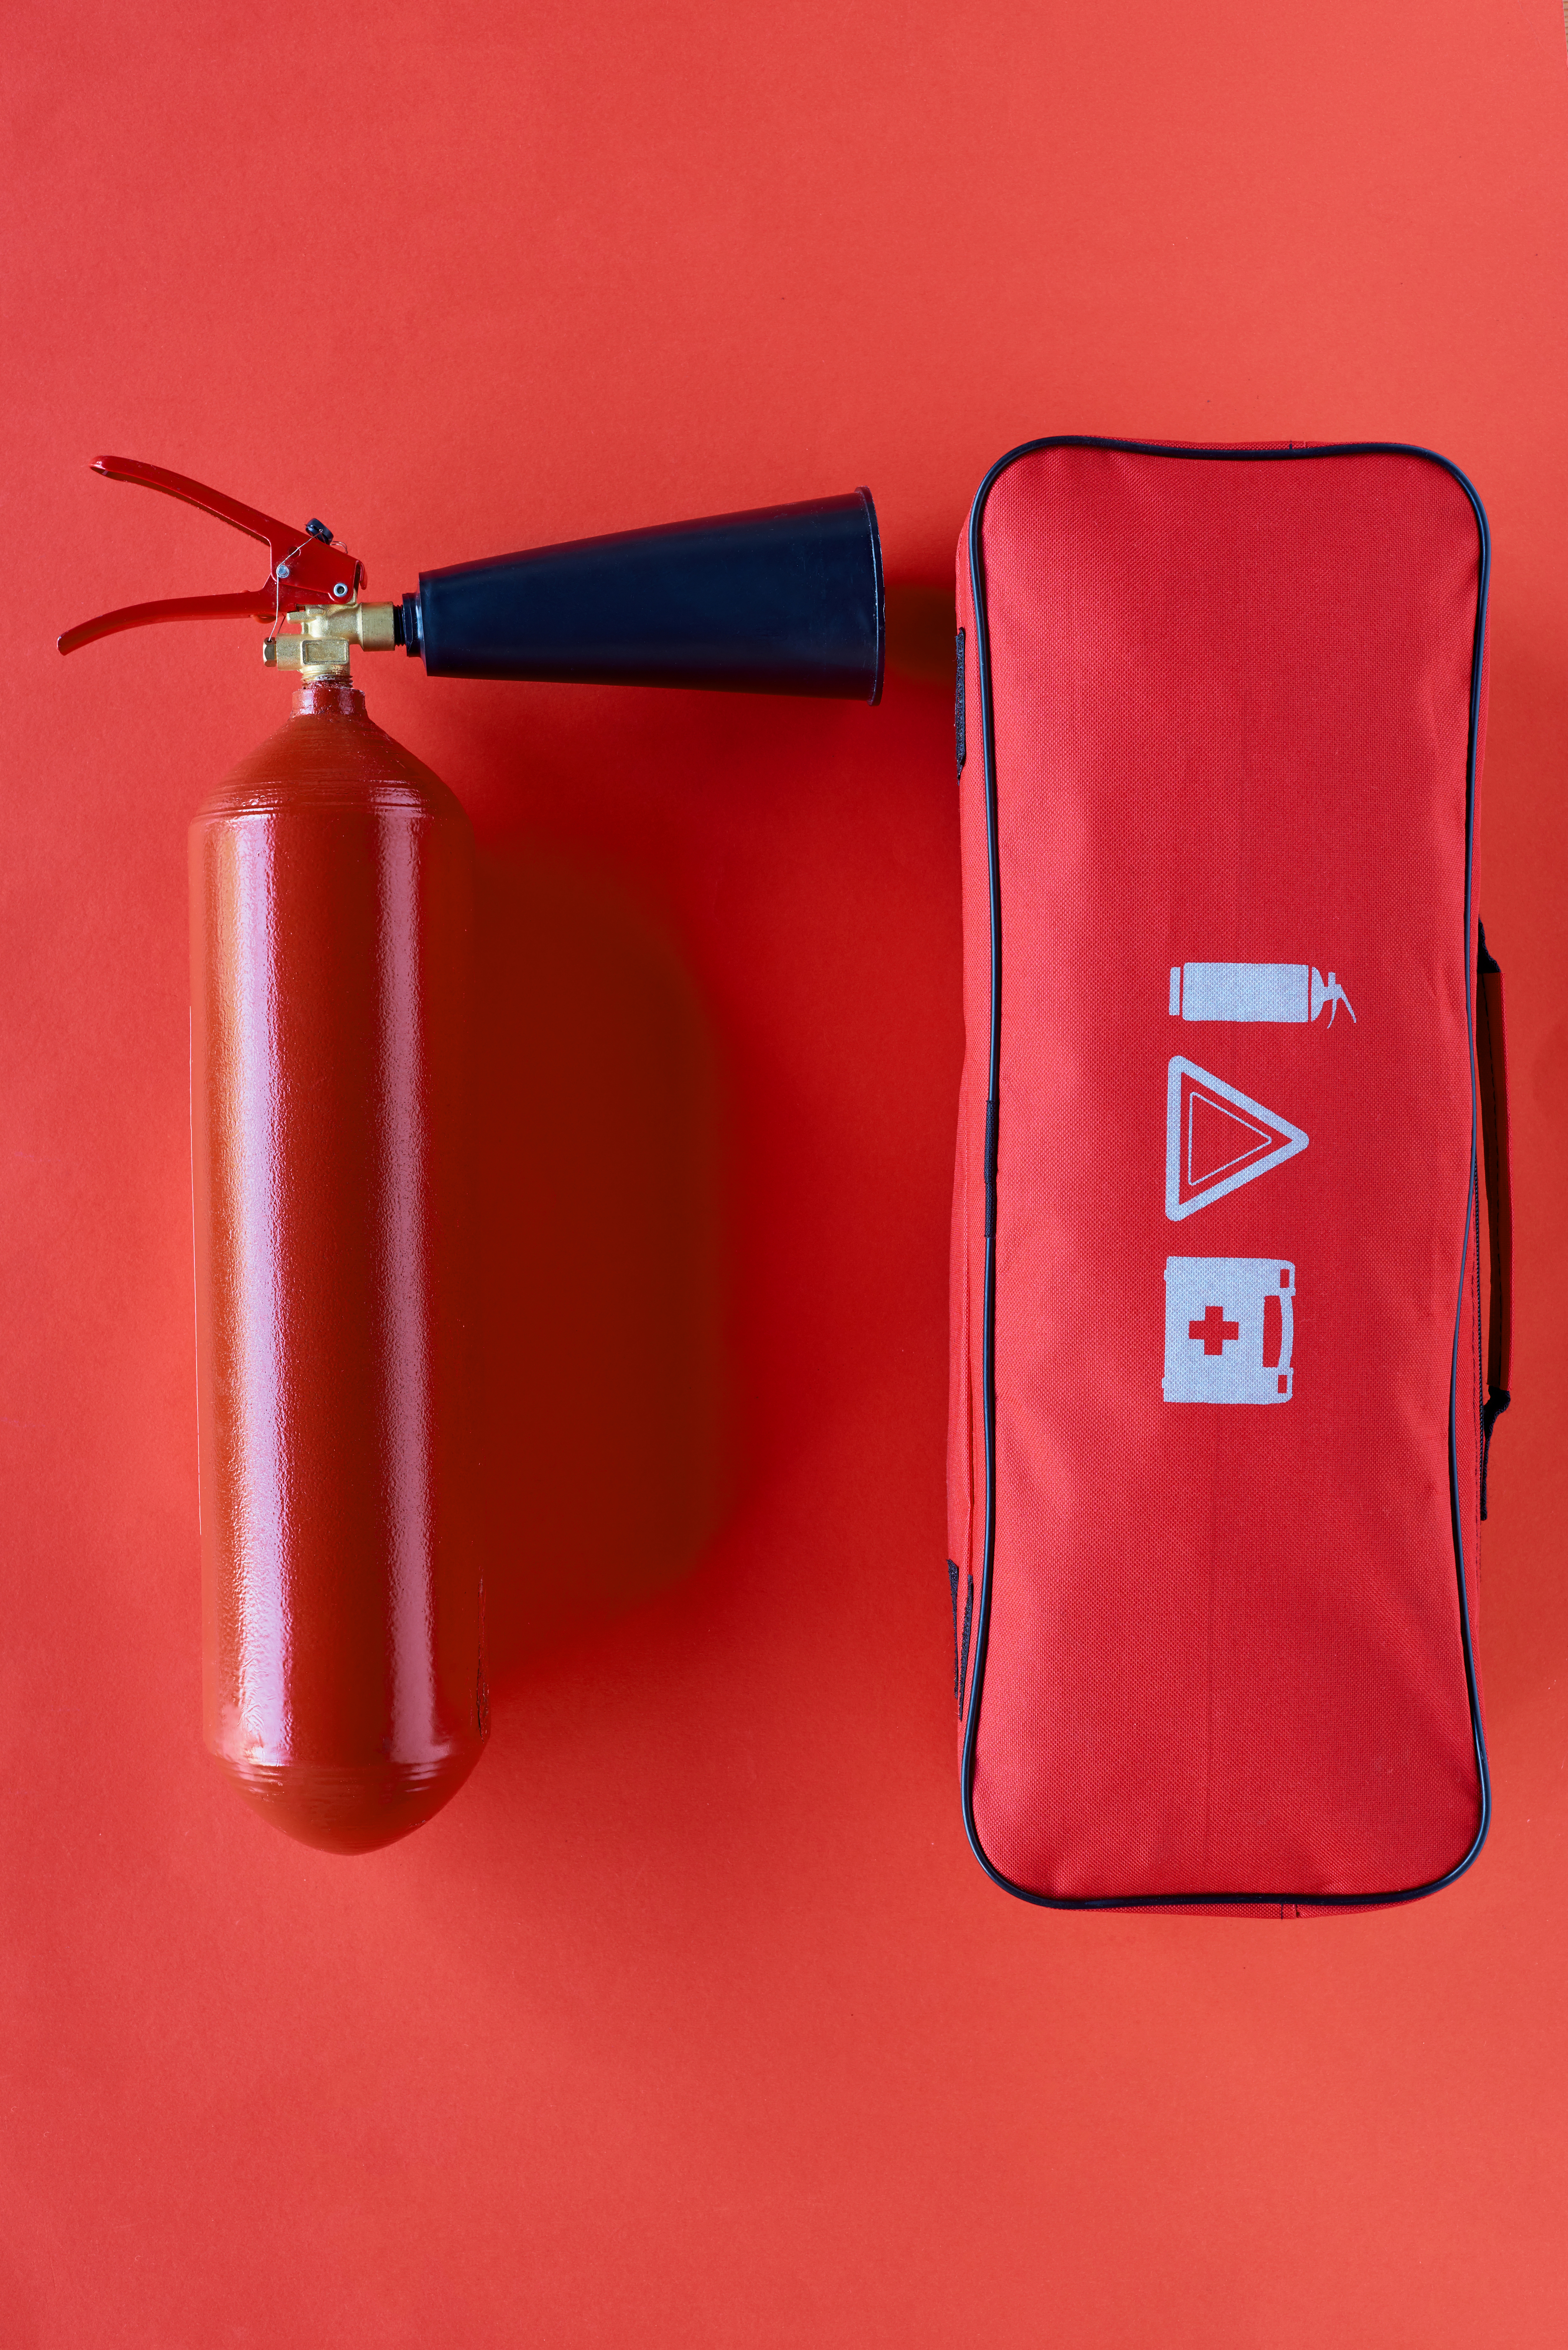 top view of fire extinguisher and automotive handbag on red background